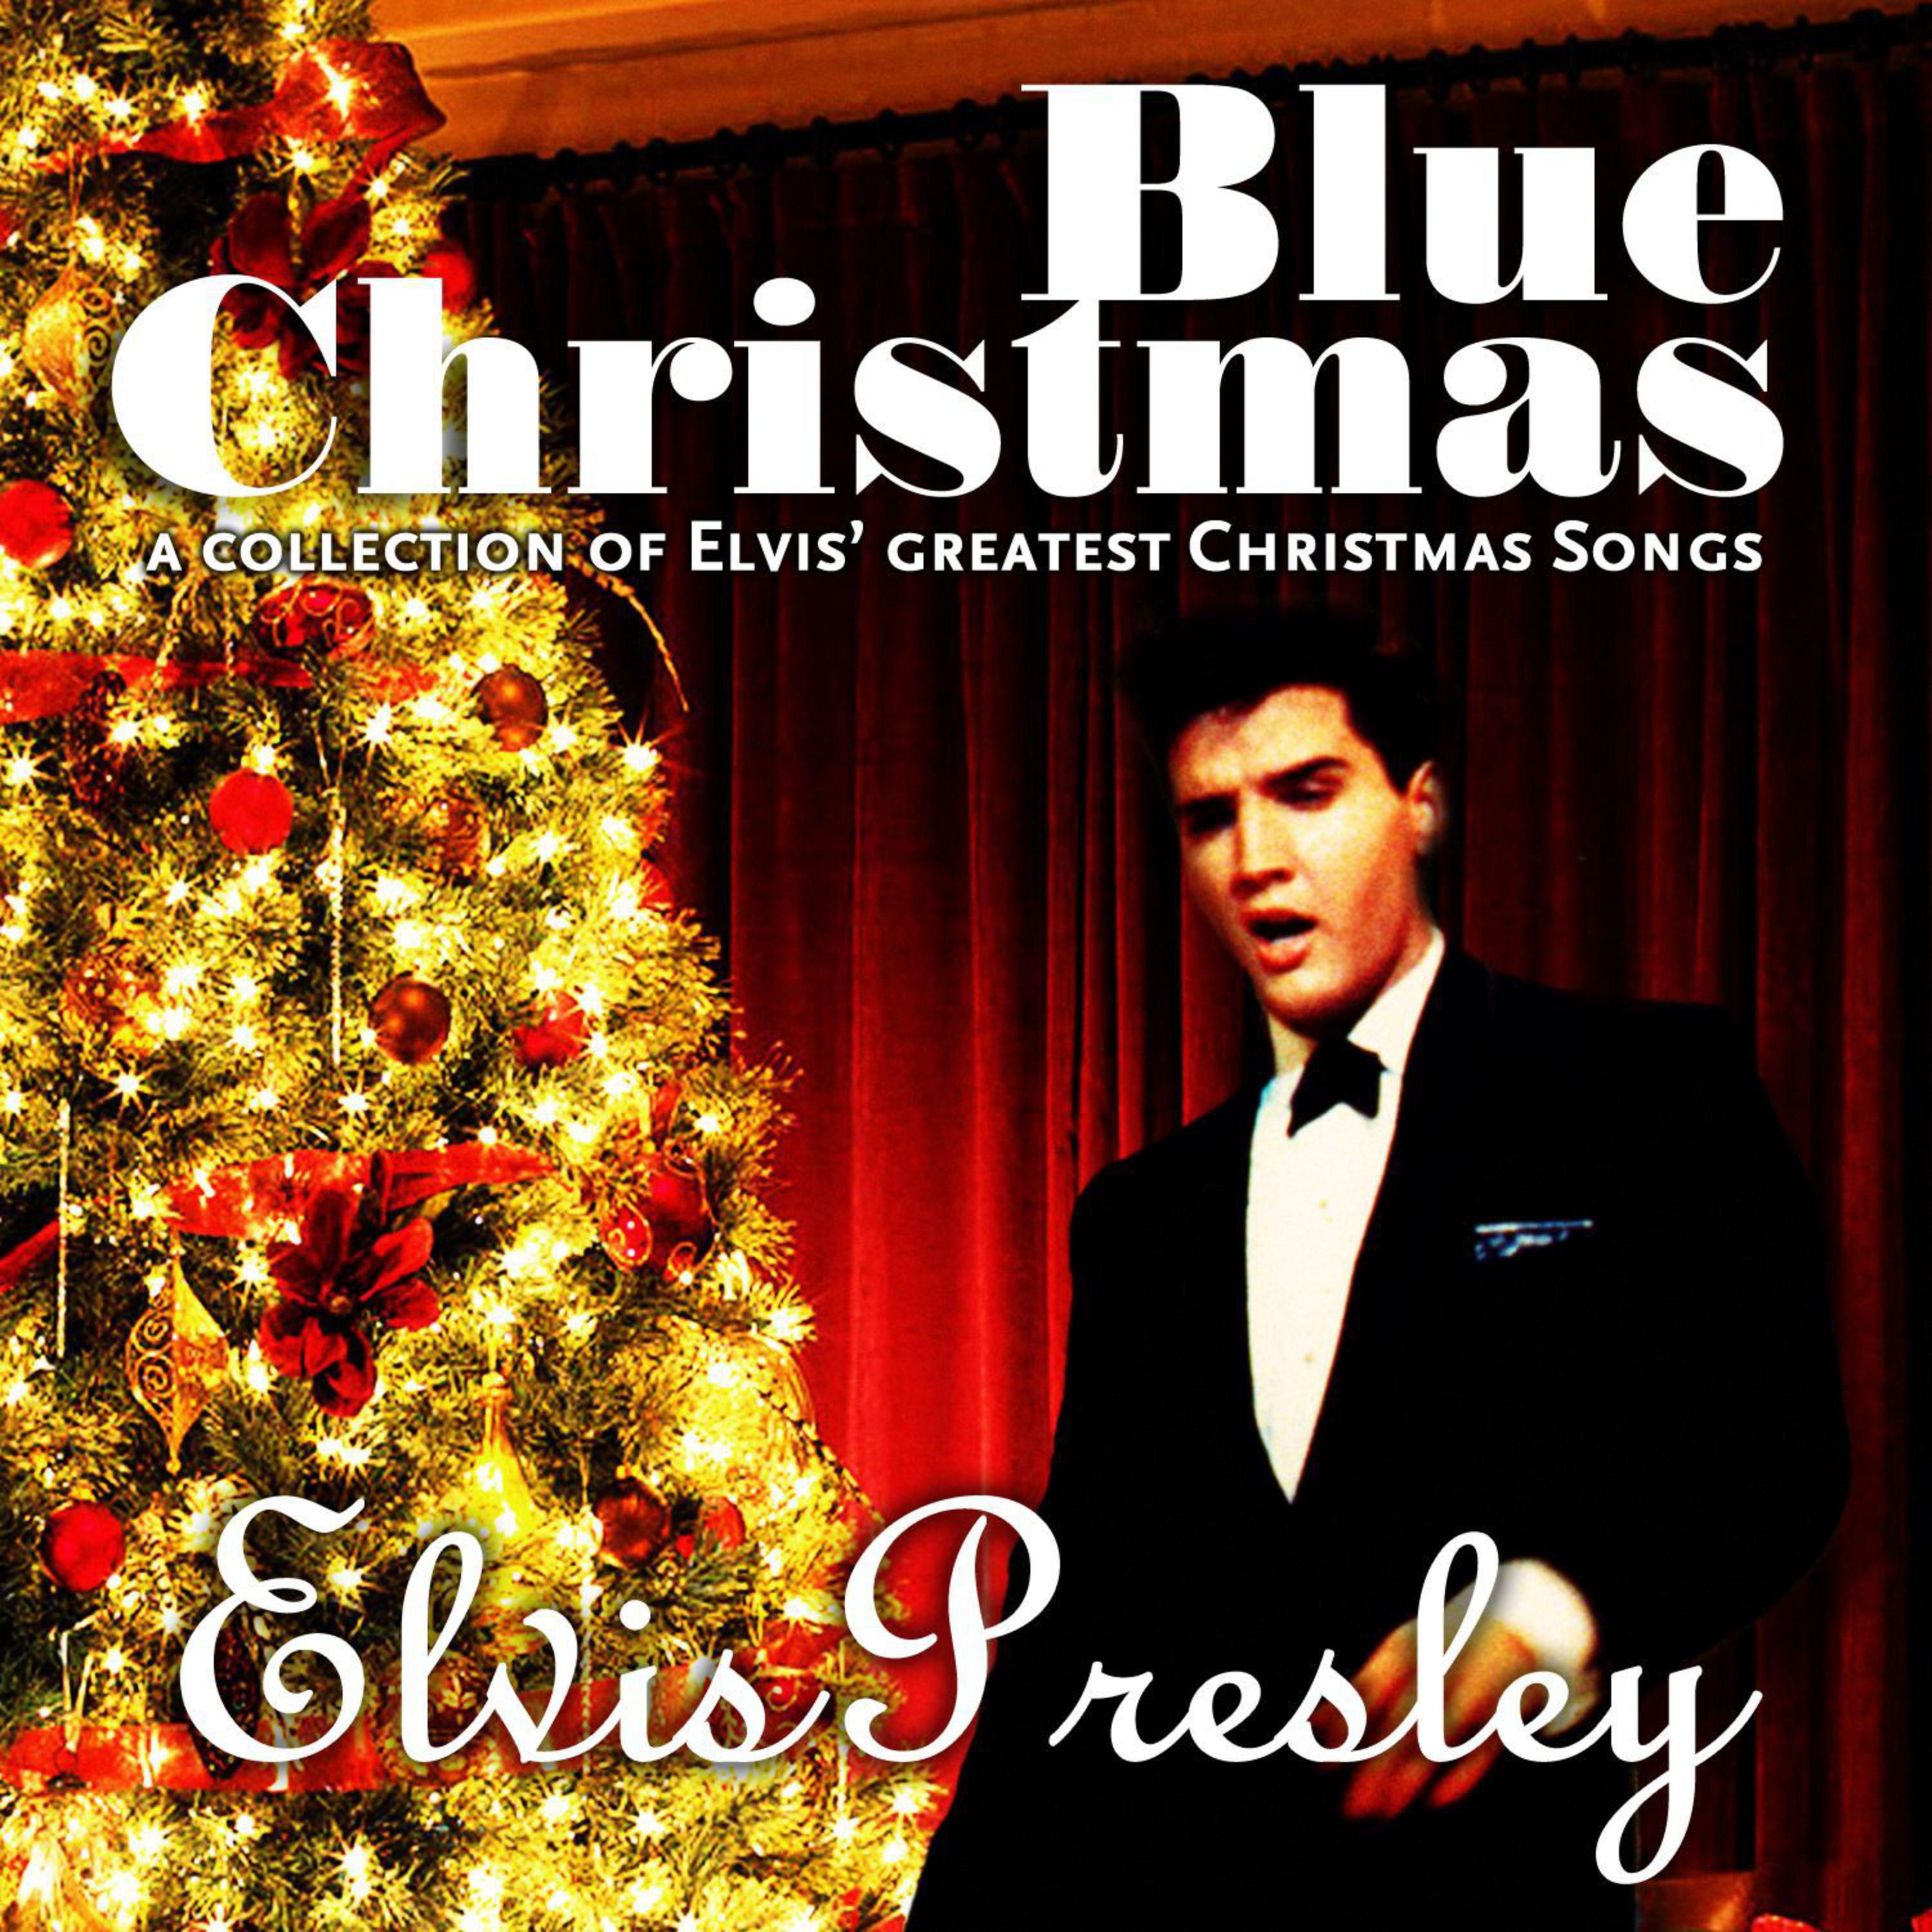 Blue Christmas (A Collection of Elvis' Greatest Christmas Songs)